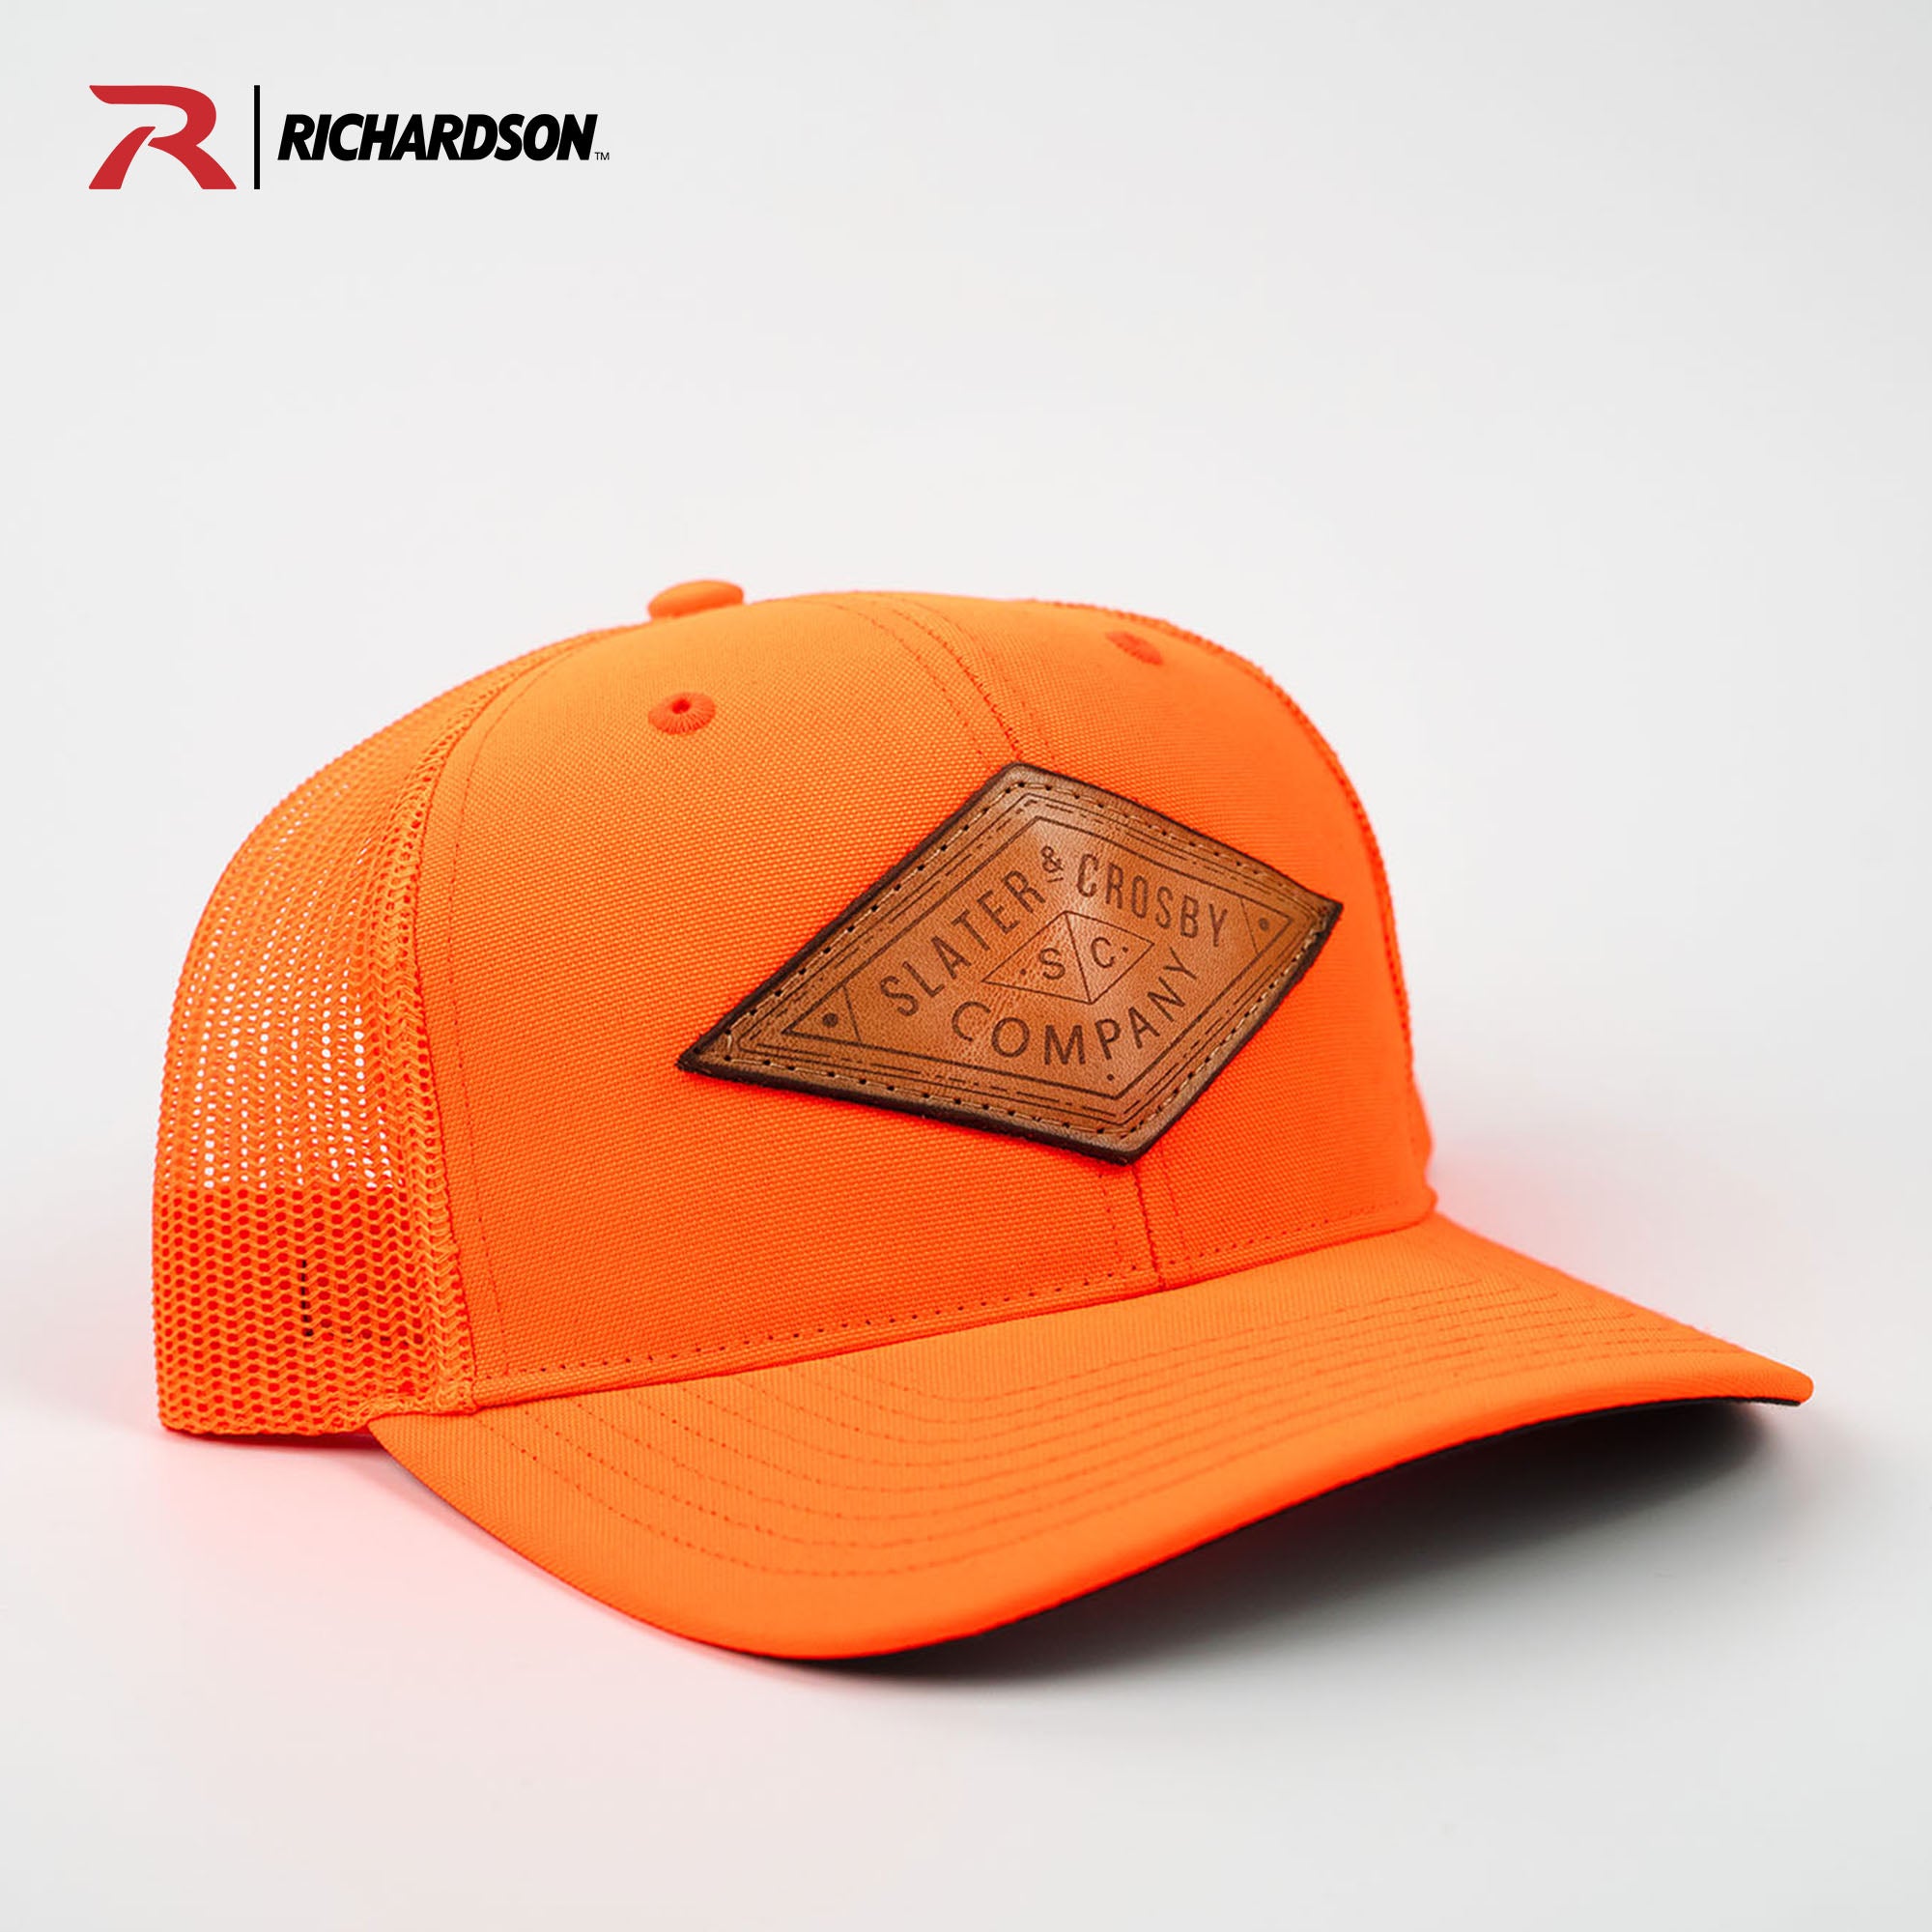 Neon orange Richardson 882 trucker hat with customized leather patch from Holtz Leather Co in Huntsville, Alabama